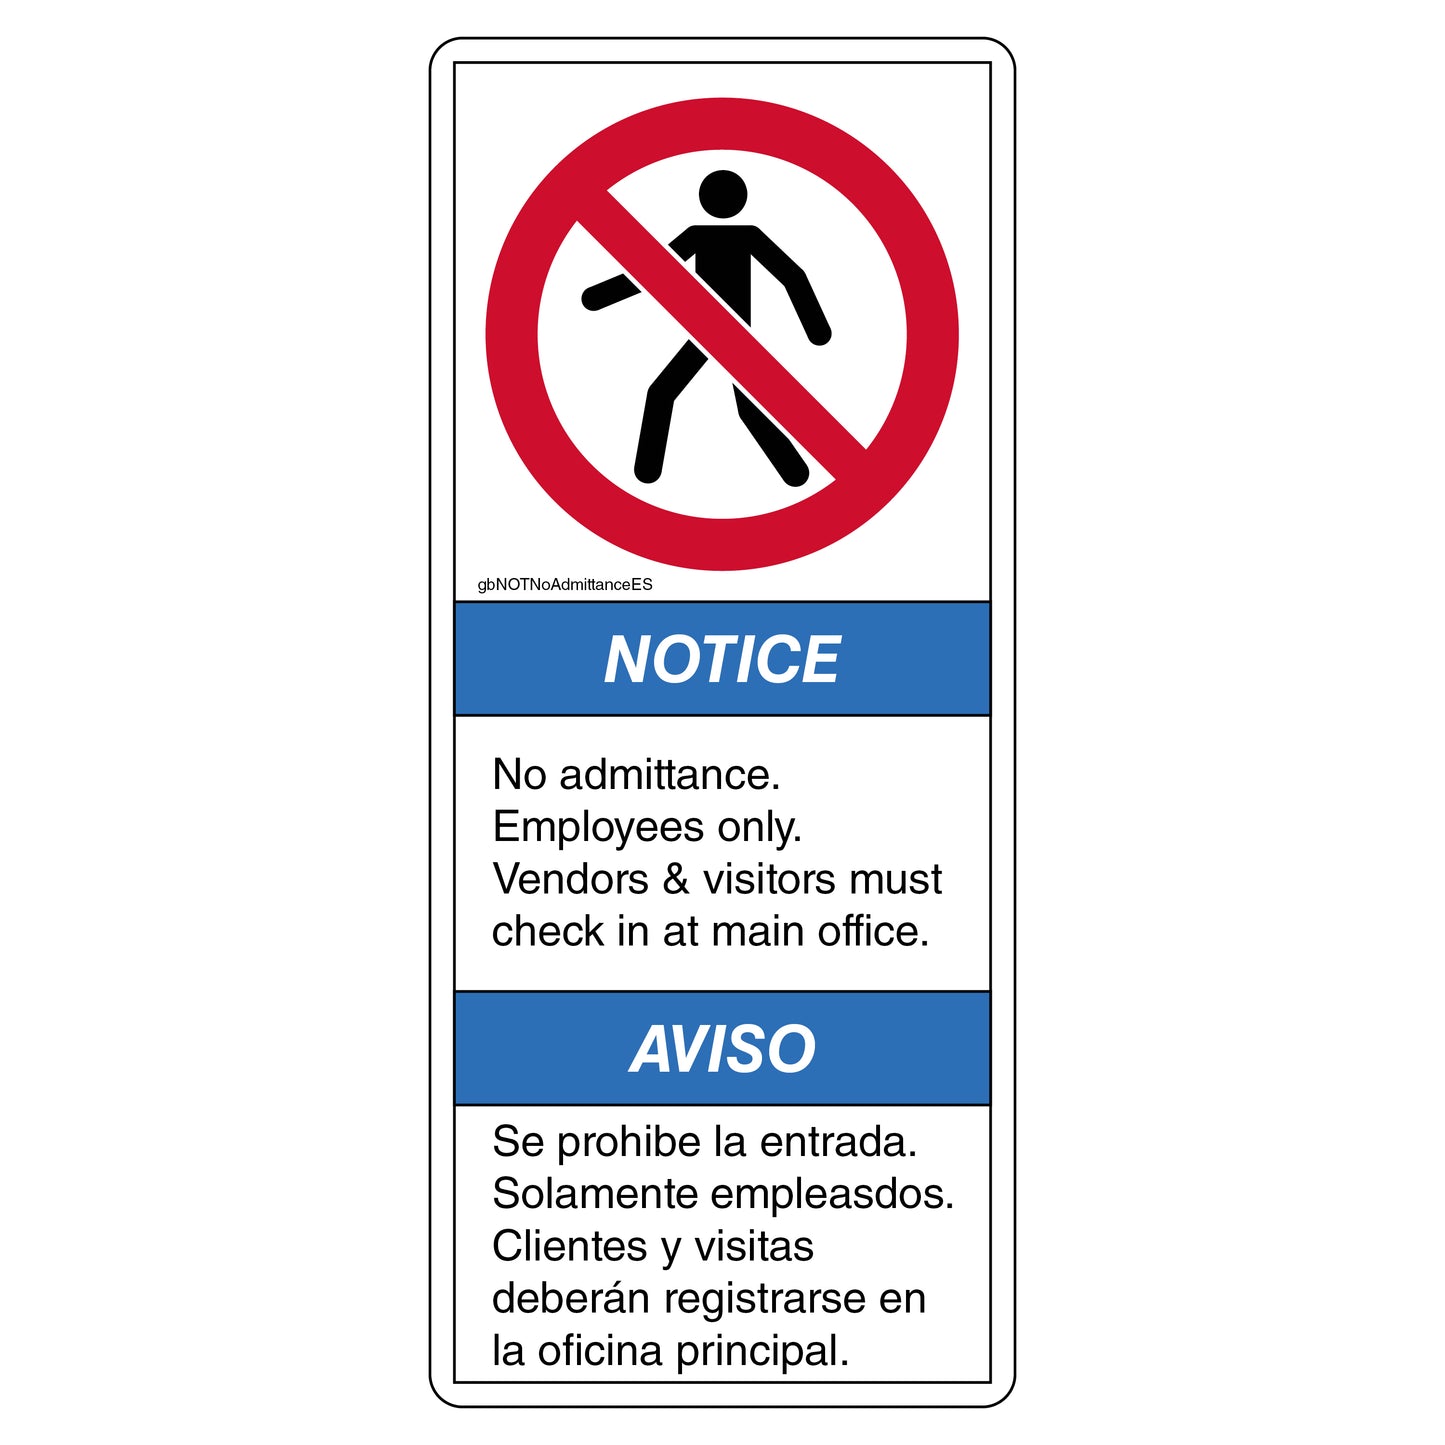 Notice No Admittance Employees Only Vendors & Visitors Must Check In At Main Office Decal in English and Spanish.